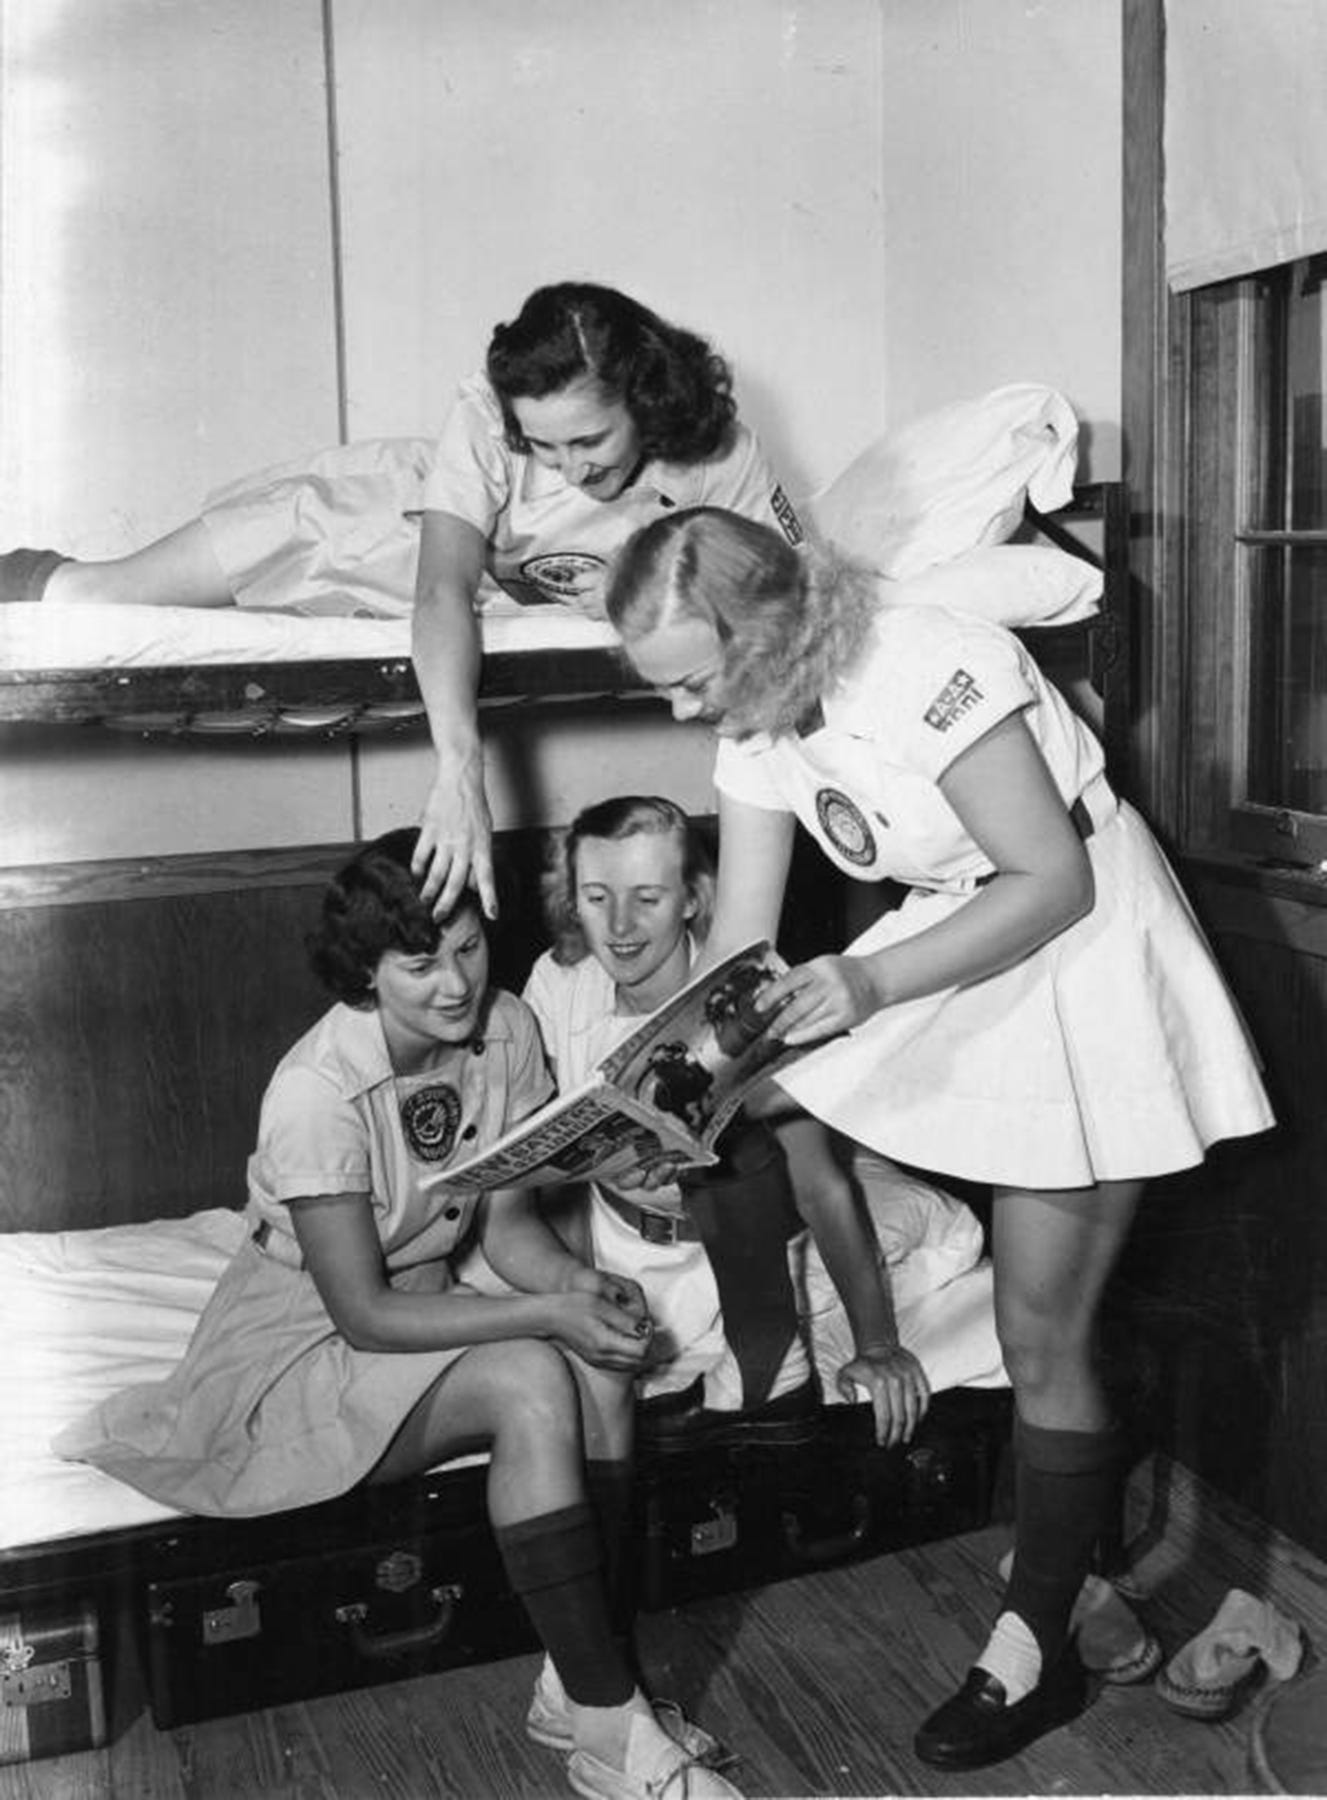 A.A.G.P.B.L. players (left to right) Daisy Junor, 27, South Bend; Dorice Reid, 19, Chicago club member; Dodie Healy, 19, Chicago club member; (top) Gene George, 20, Peoria club member, fraternizing in a bunk room over a sports magazine, 1948. (Photo courtesy State Archives of Florida)